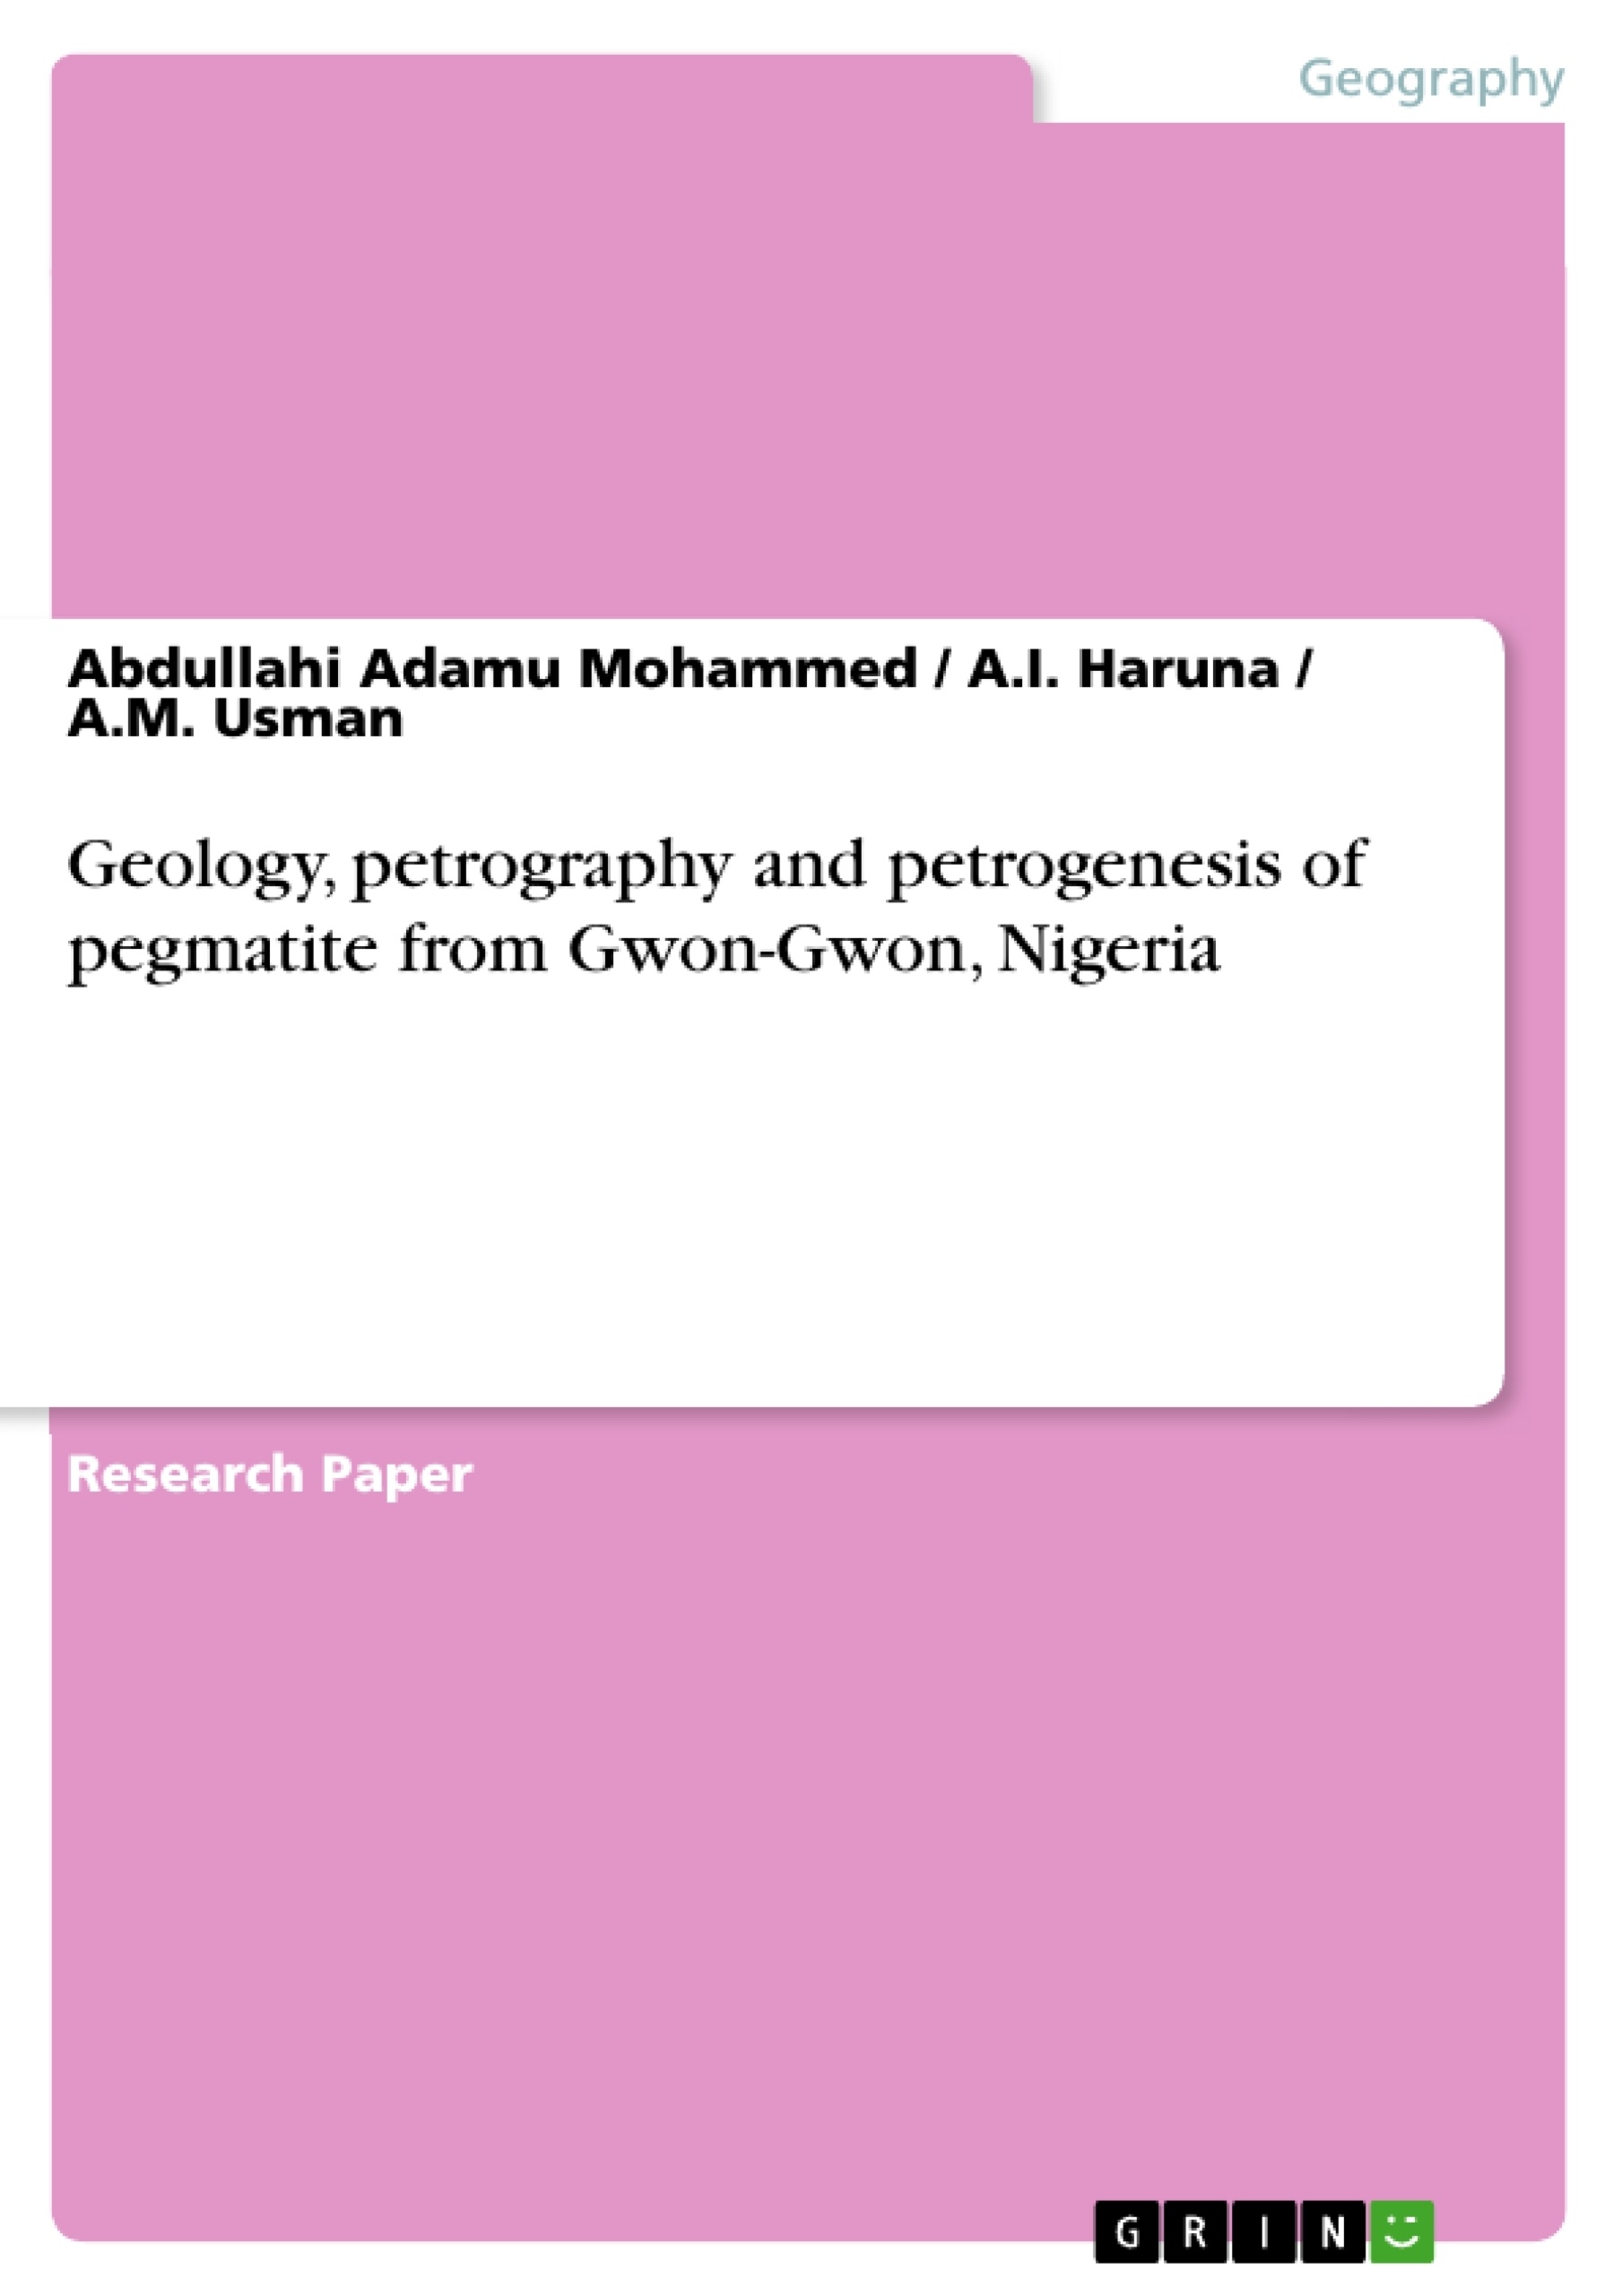 Titre: Geology, petrography and petrogenesis of pegmatite from Gwon-Gwon, Nigeria